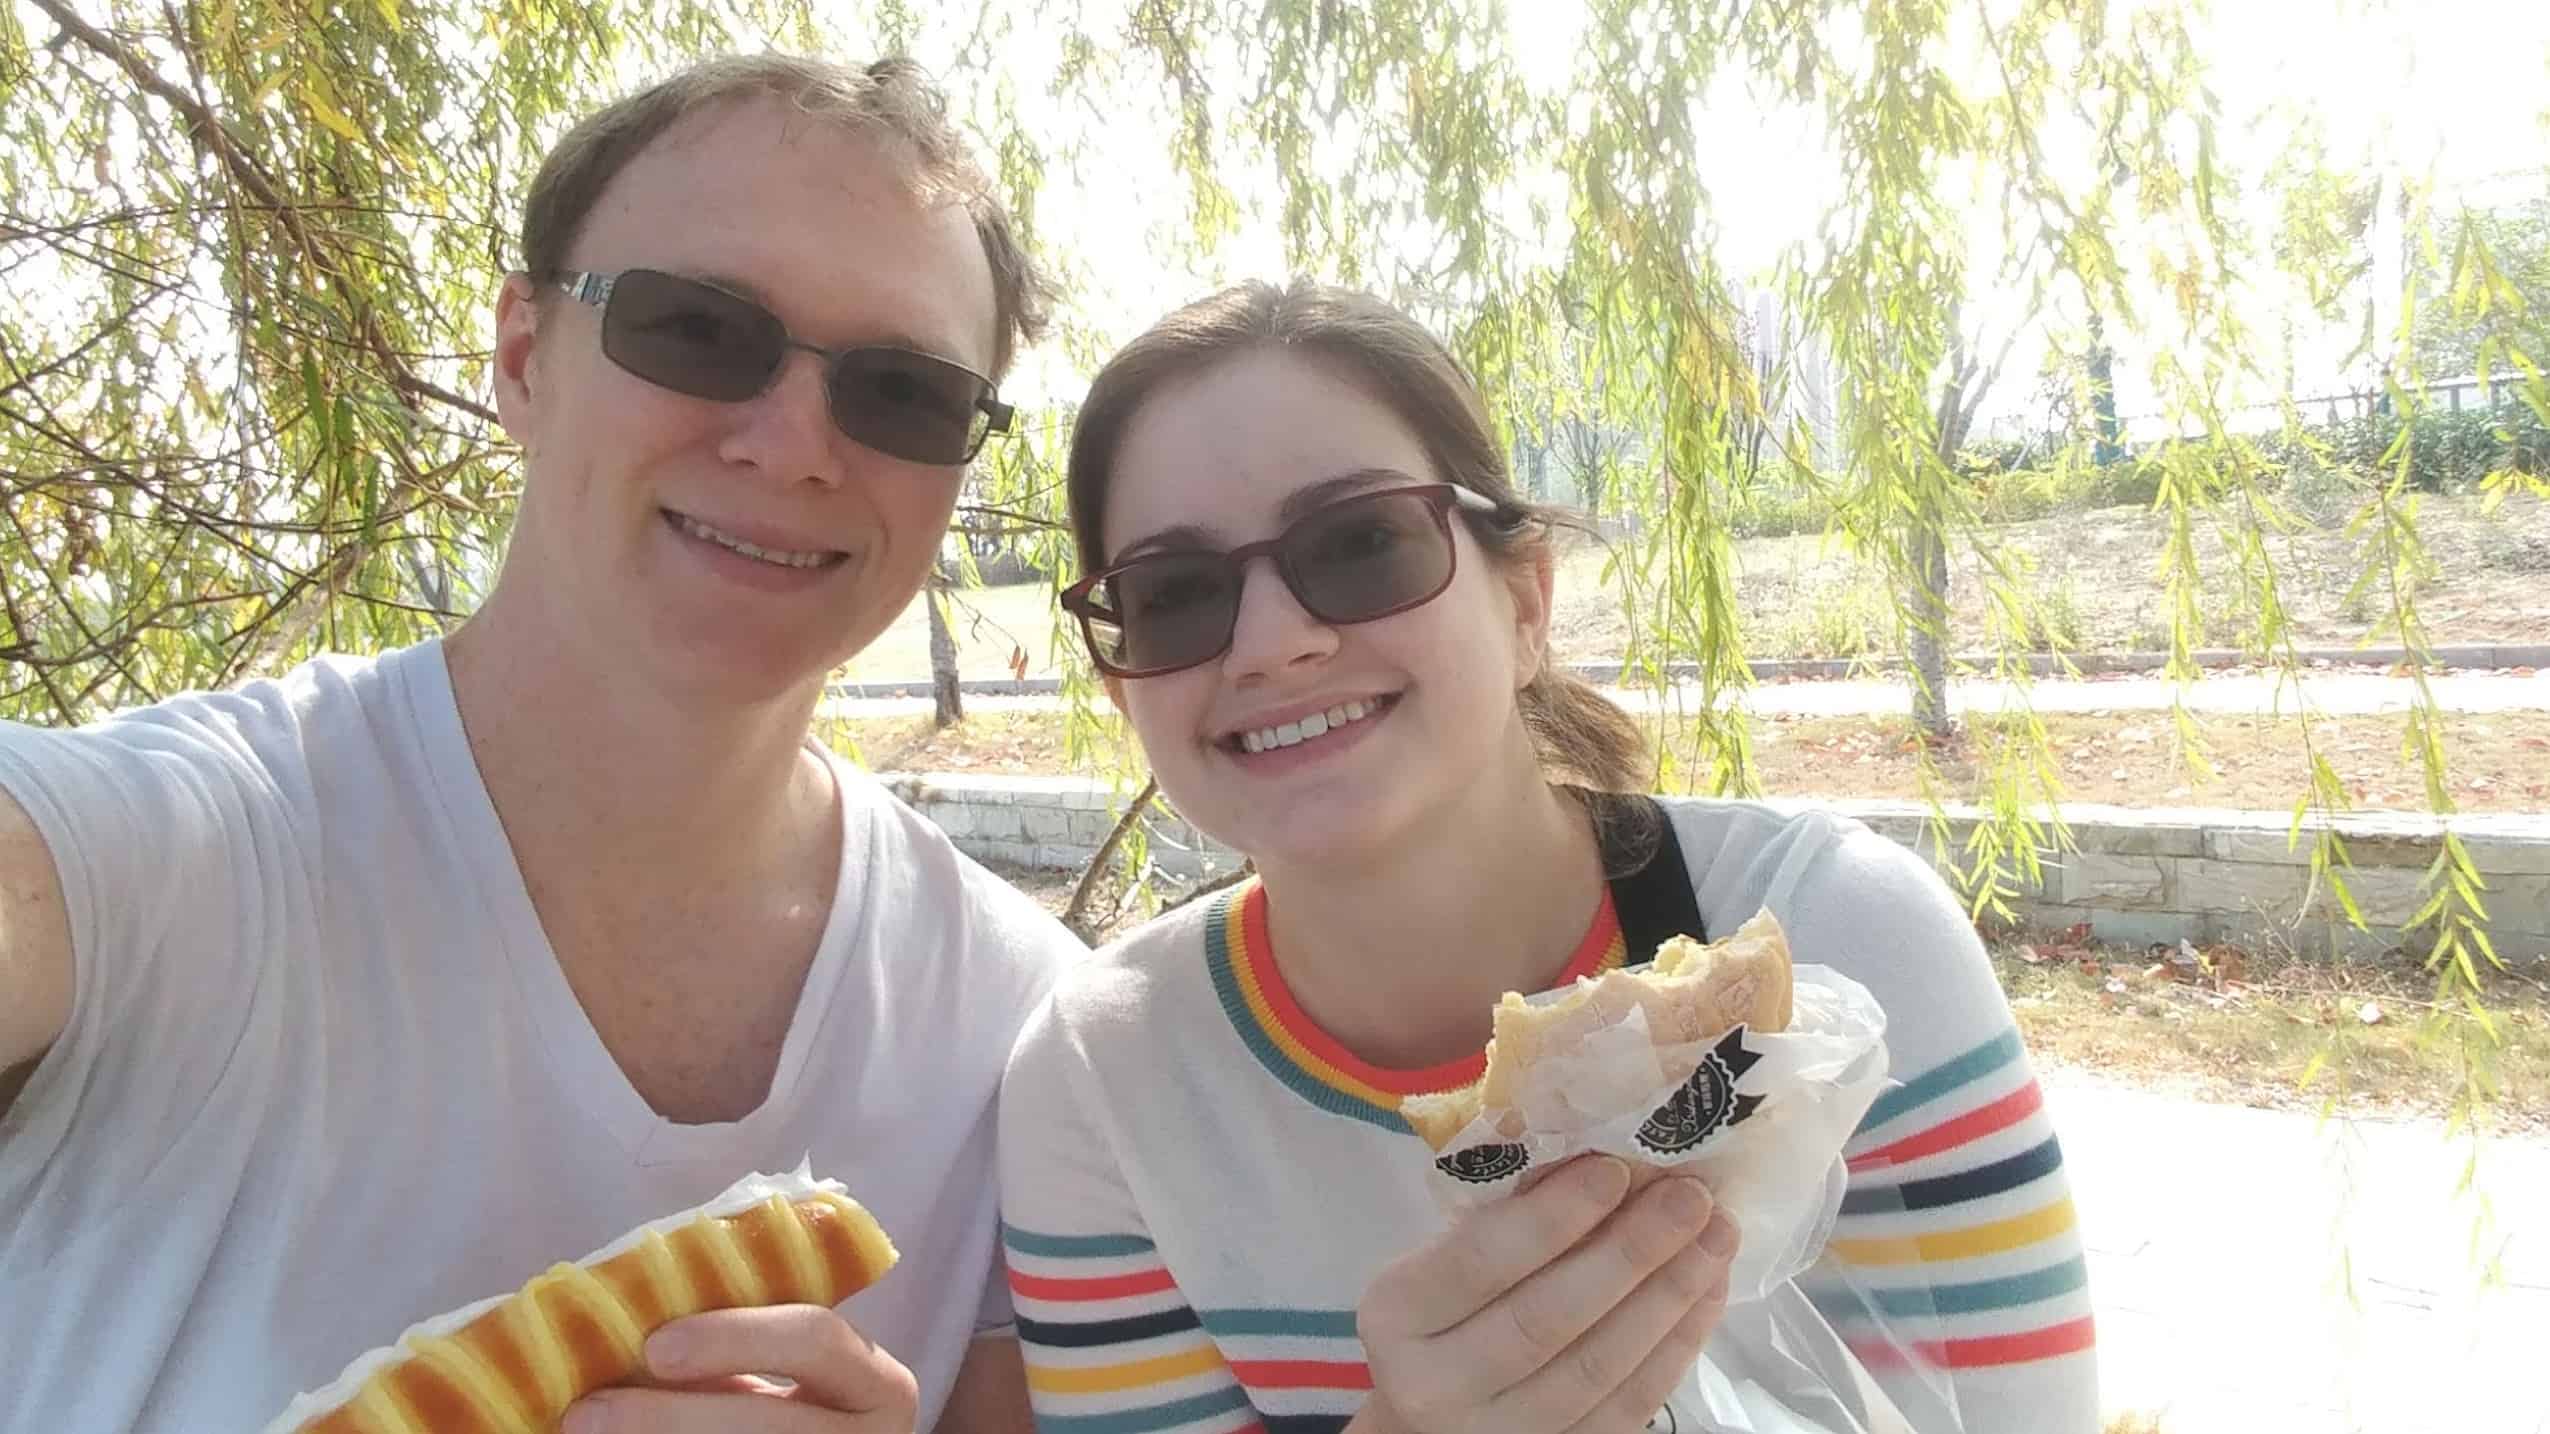 Derek and Kacie eating bakery goodies under a willow tree in Nanjing, China